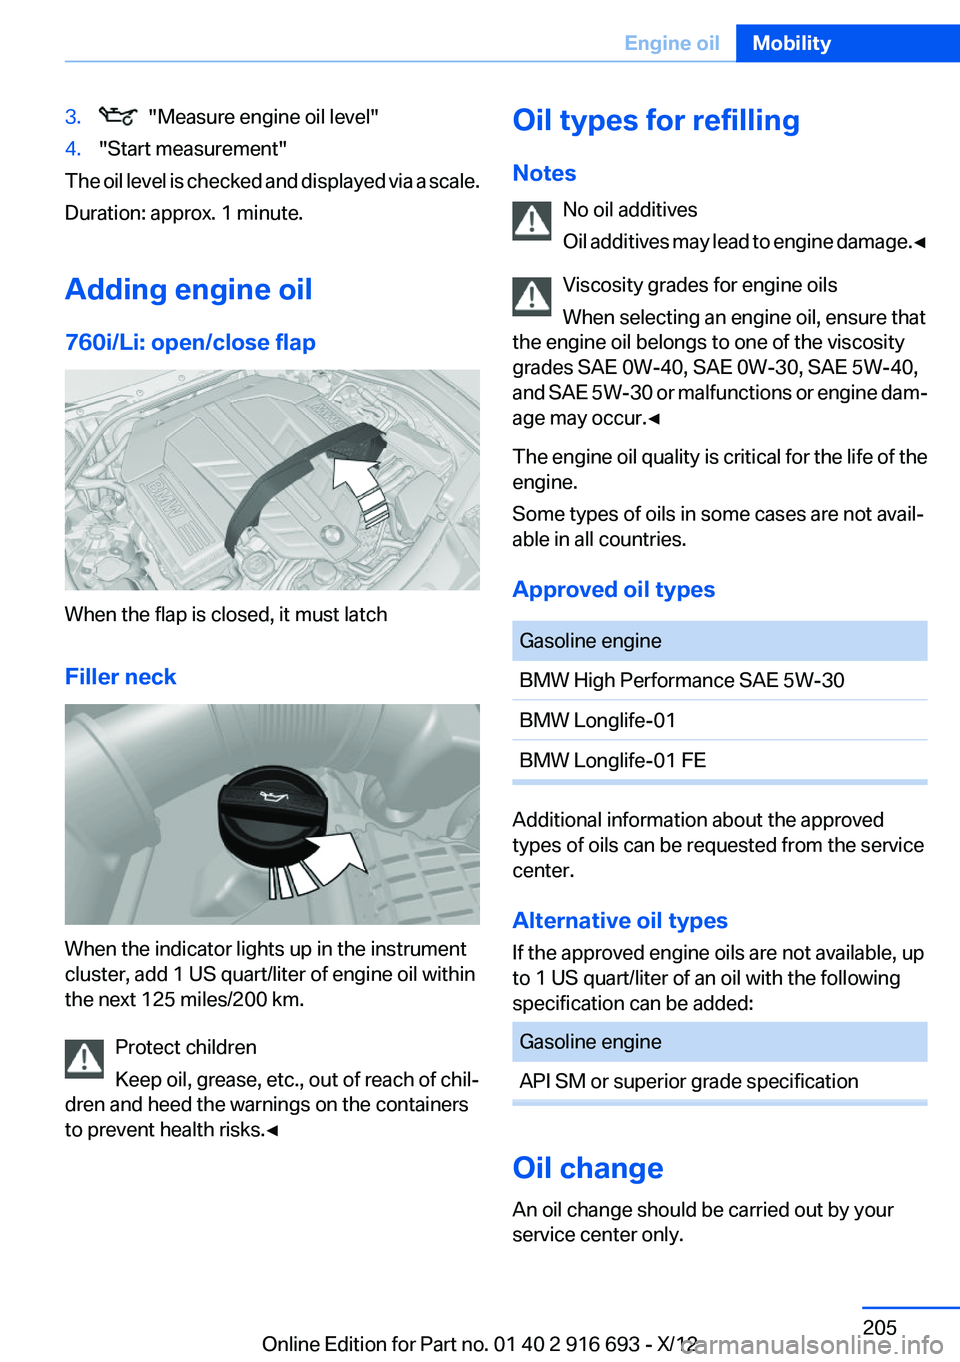 BMW 750I XDRIVE 2013  Owners Manual 3.  "Measure engine oil level"4."Start measurement"
The oil level is checked and displayed via a scale.
Duration: approx. 1 minute.
Adding engine oil
760i/Li: open/close flap
When the 